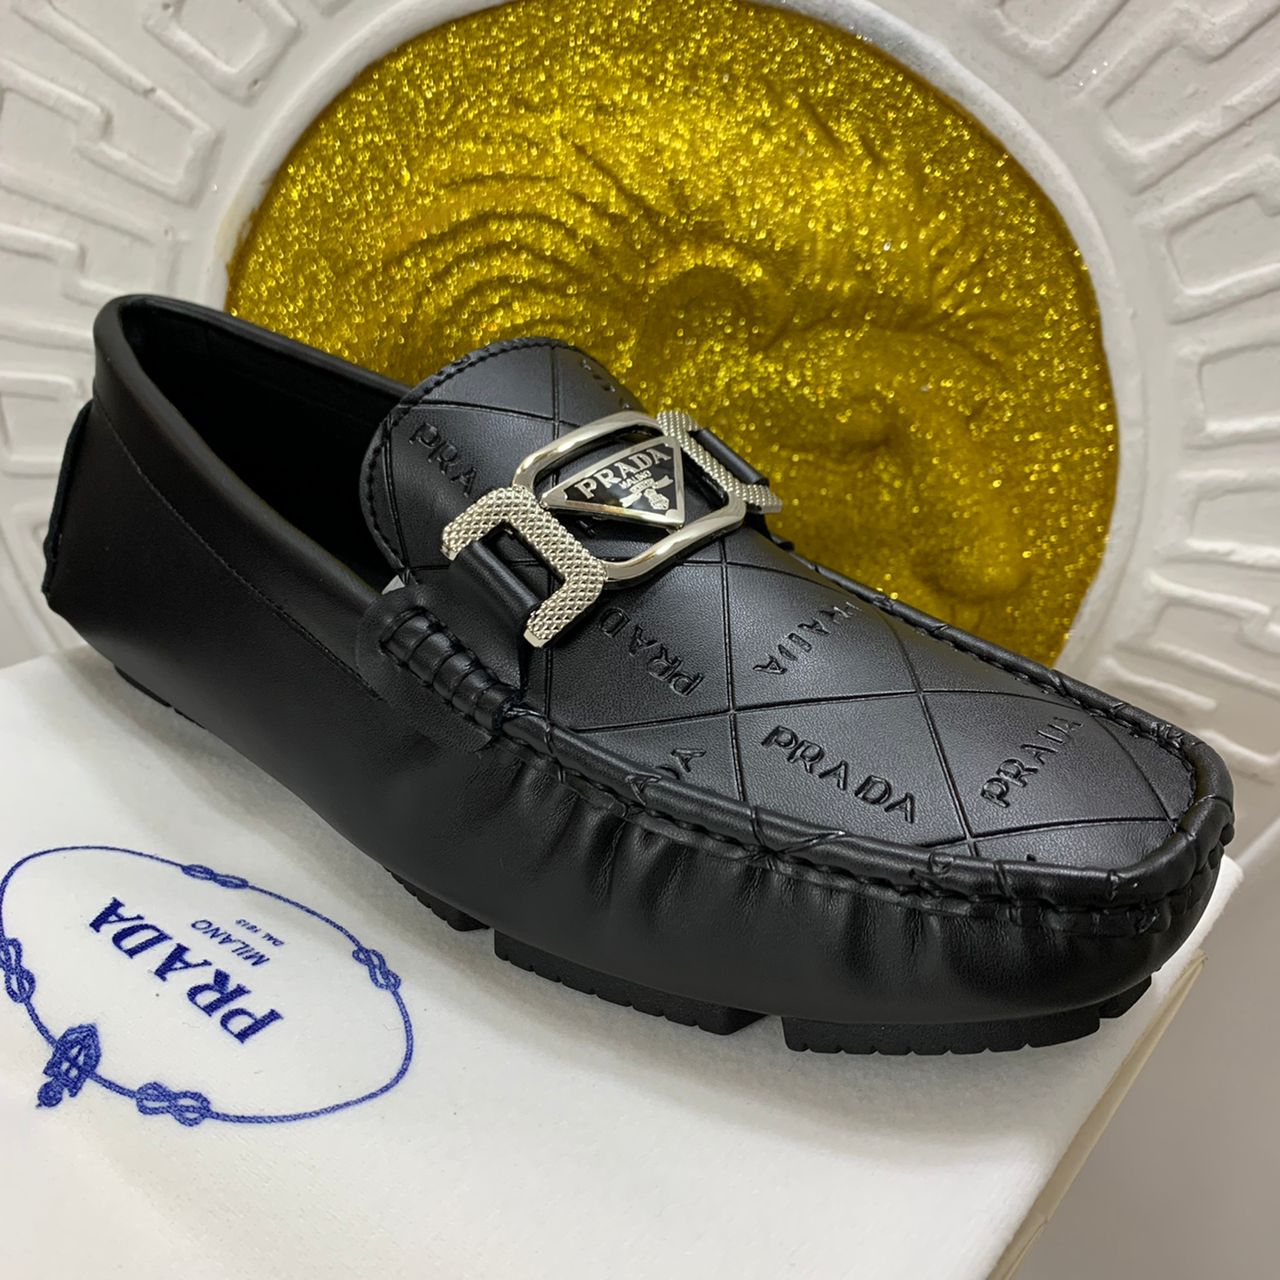 MEN'S CASUAL LV LOAFERS SHOE  CartRollers ﻿Online Marketplace